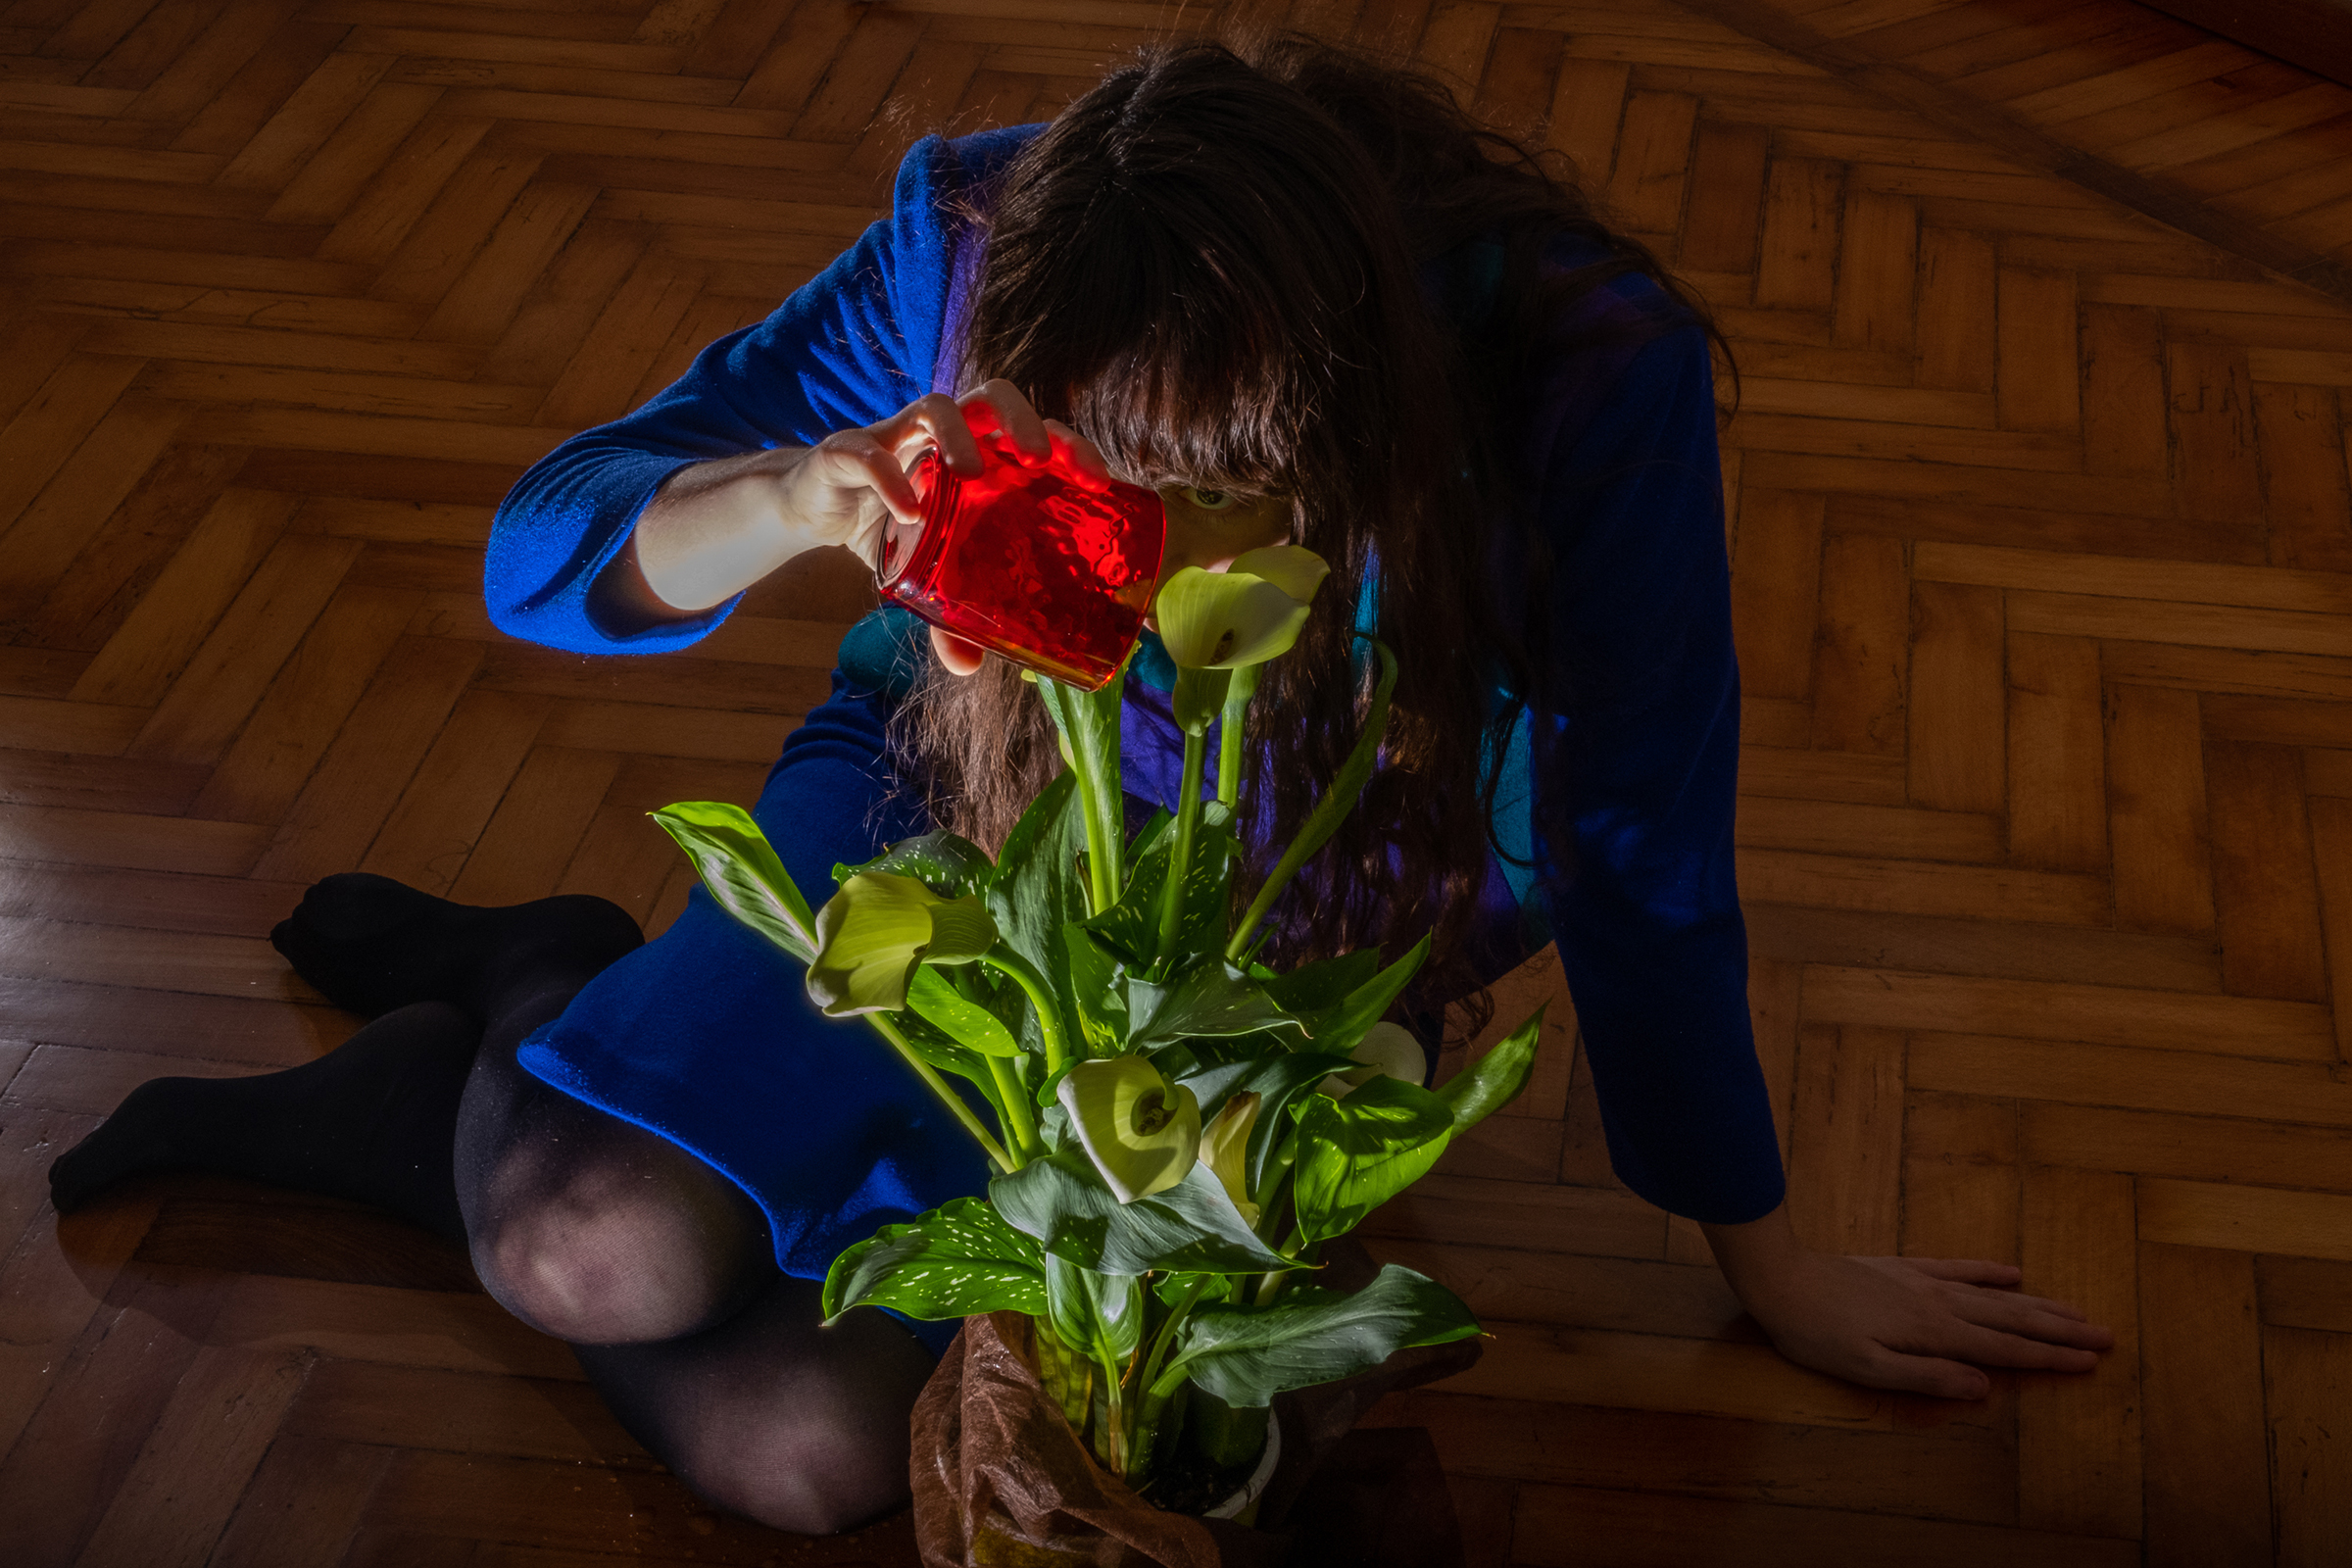 3:40 P.M. Watering the plant (Lucia Buricelli for TIME)